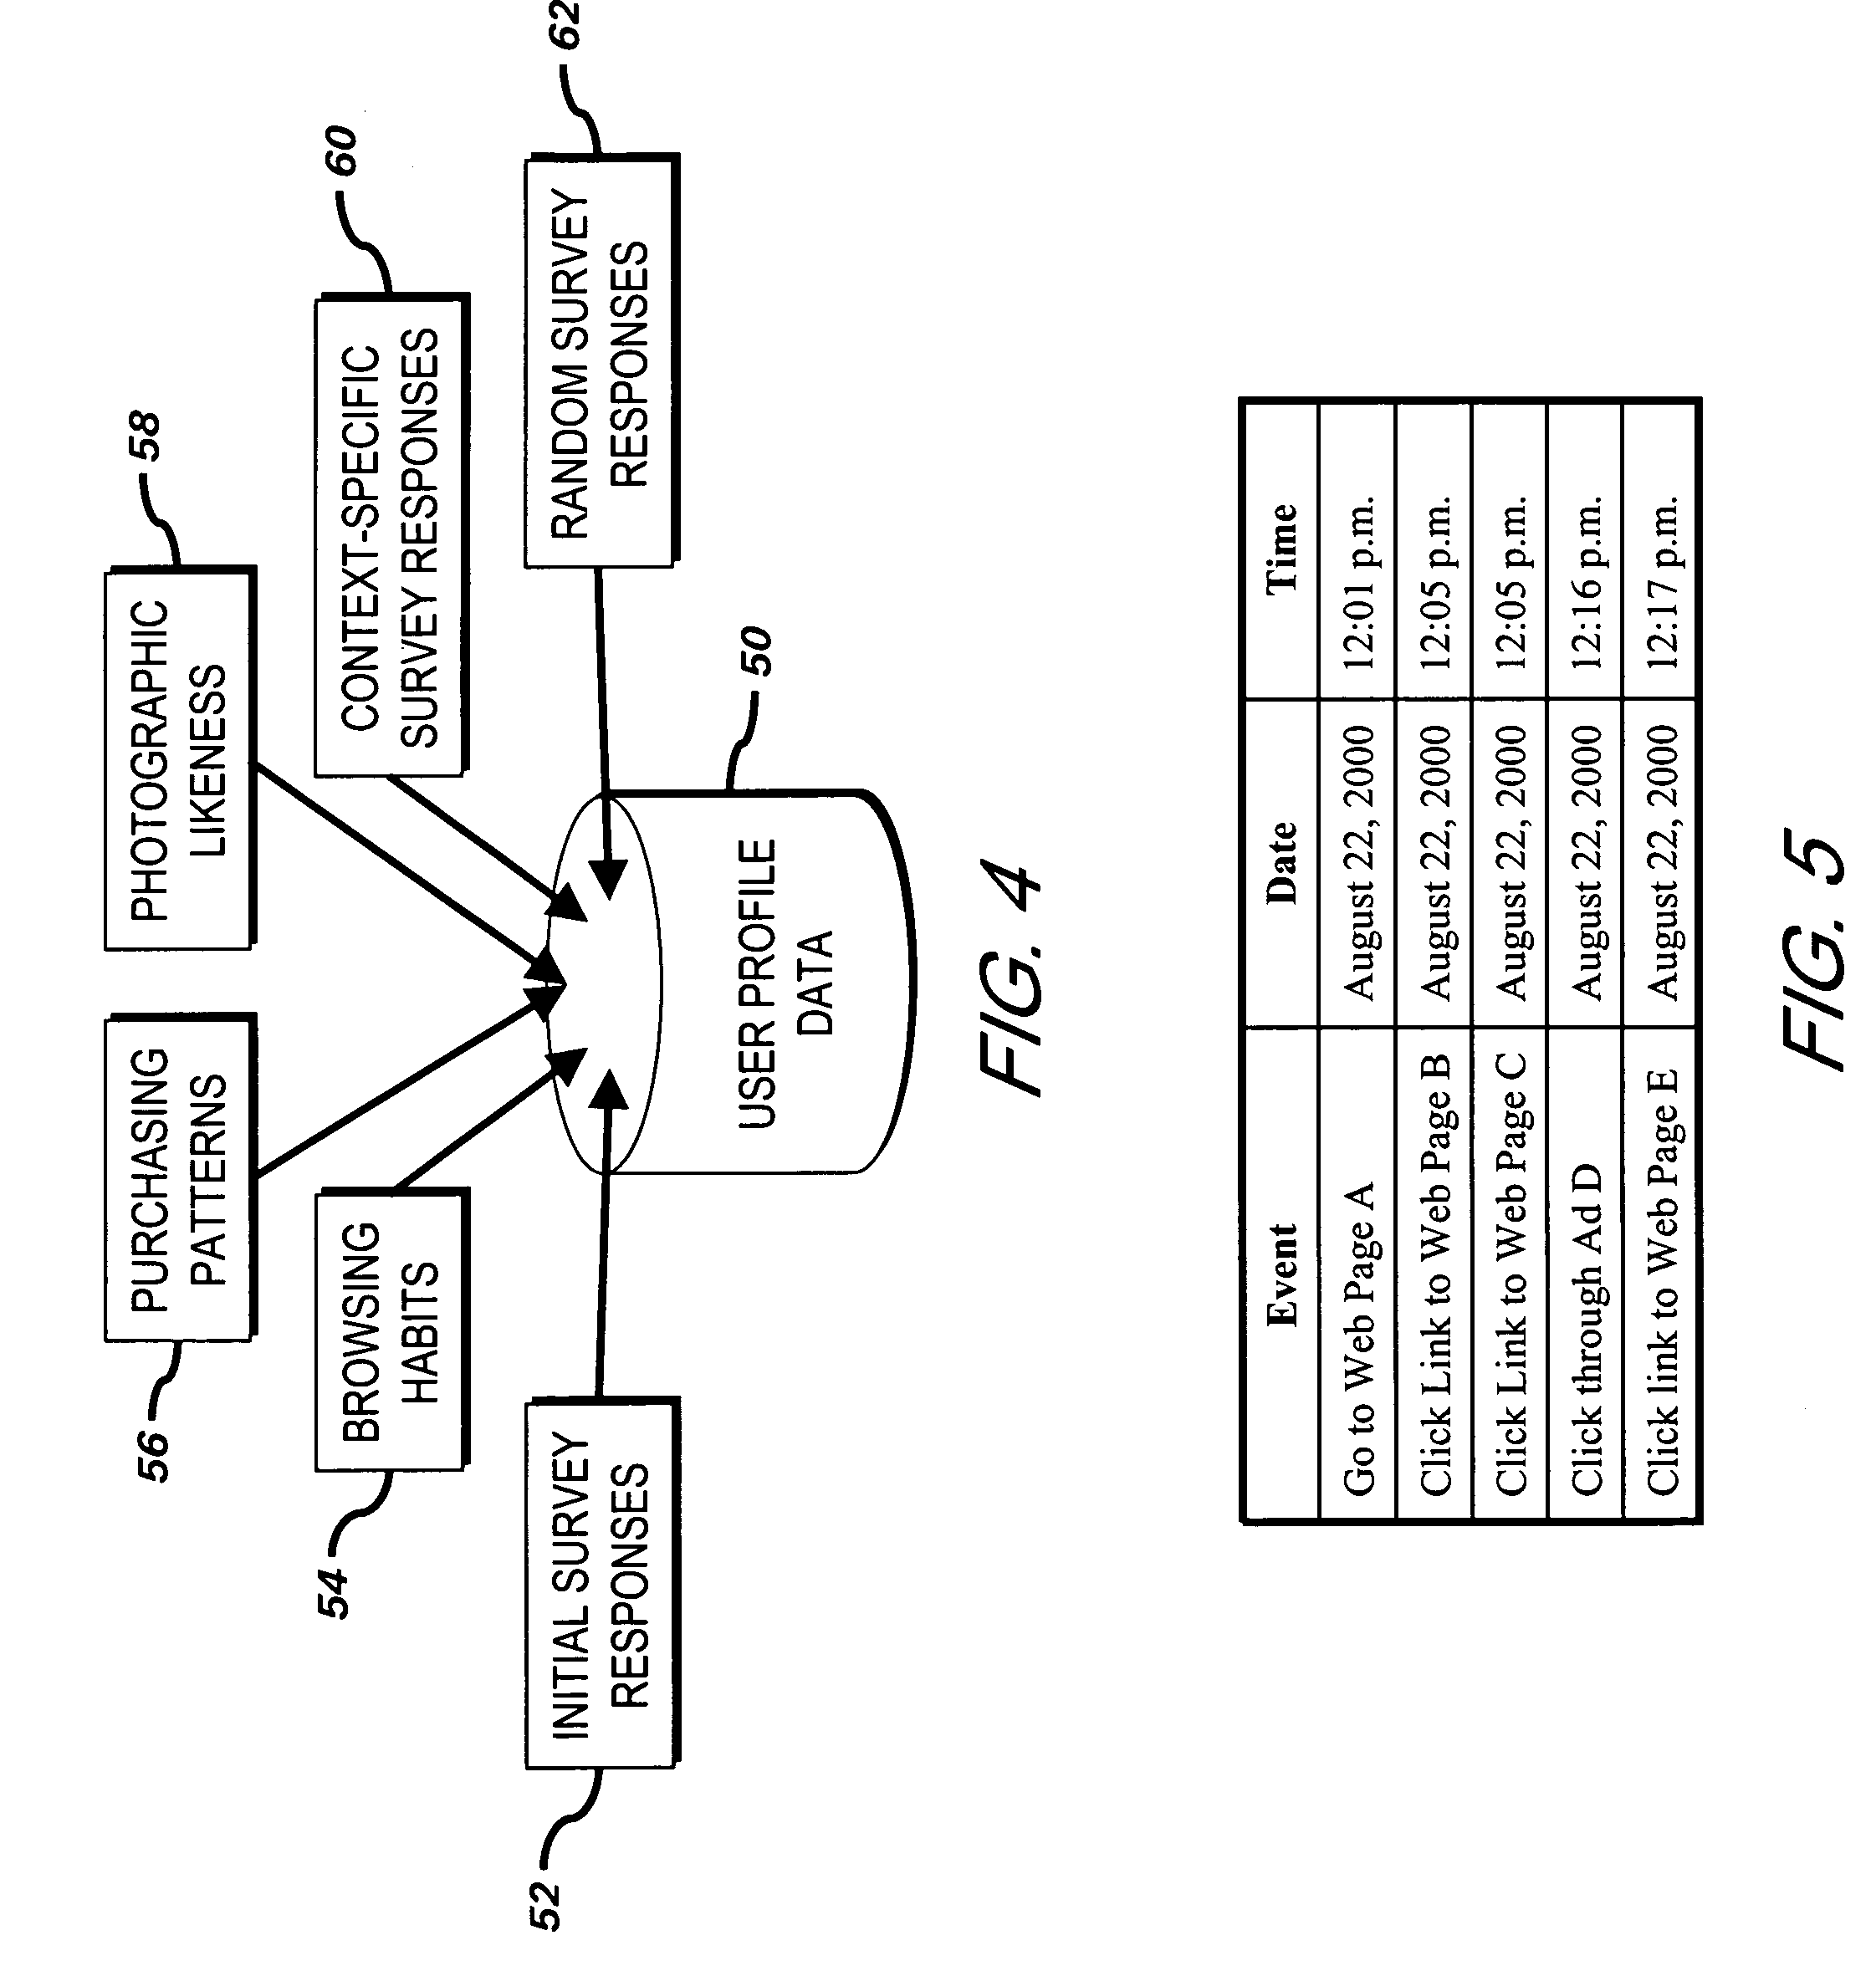 Targeted marketing system and method